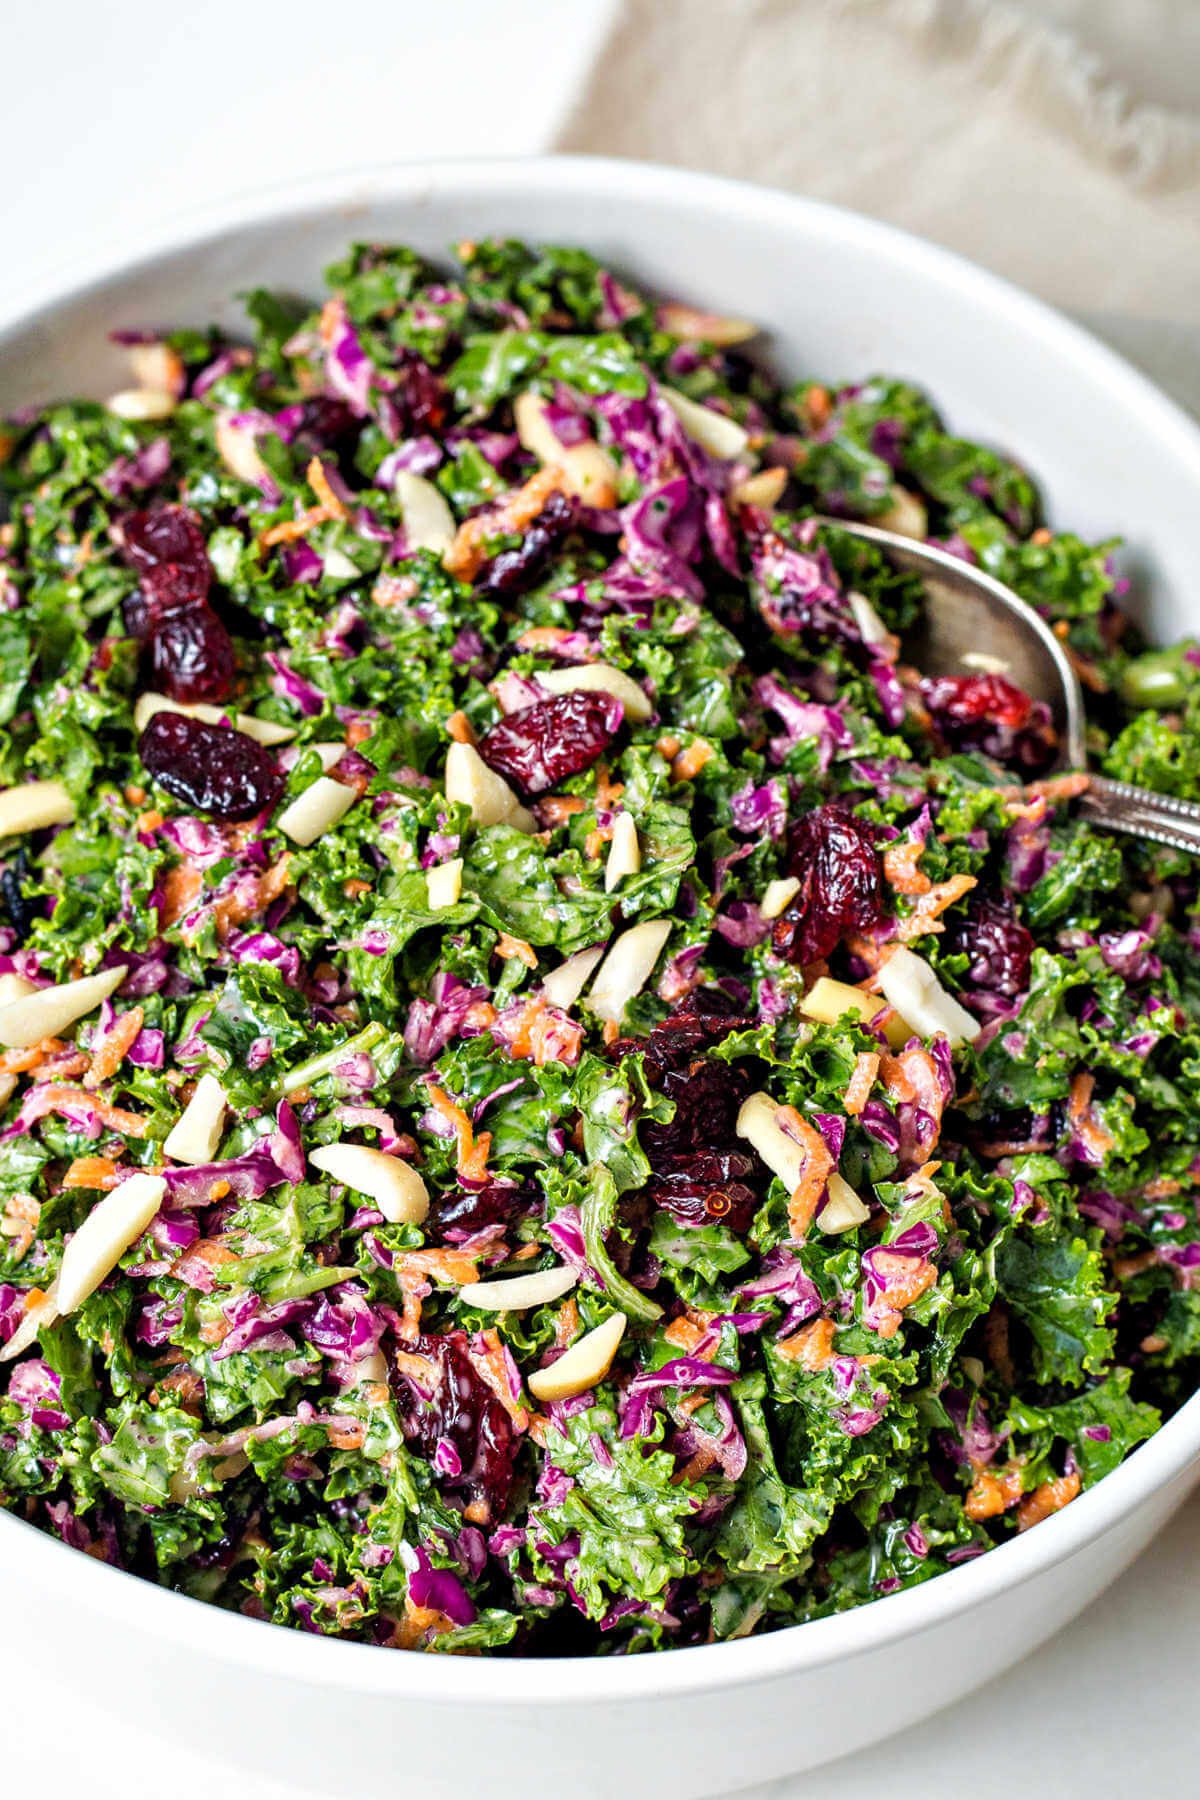 kale slaw with purple cabbage, carrots, dried cranberries, and slivered almonds in a white bowl with a serving spoon inserted sitting on a table.